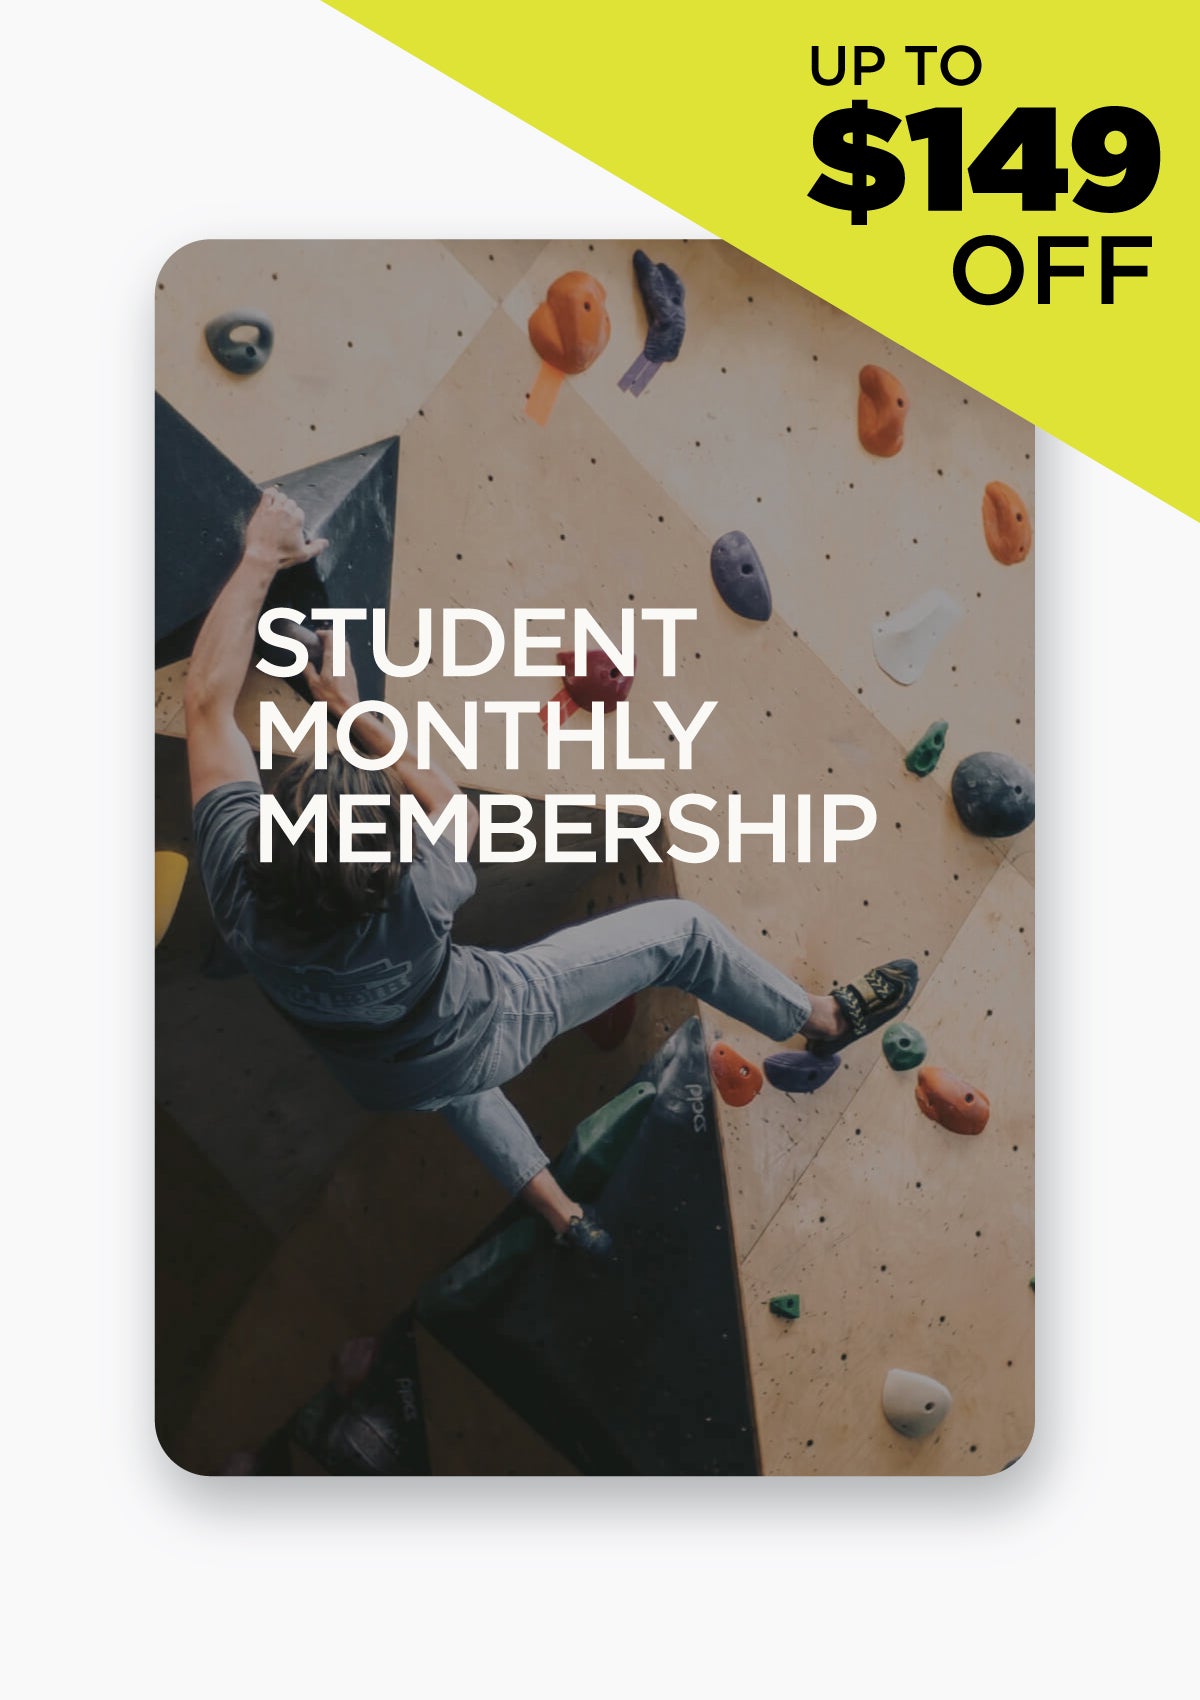 BACK TO SCHOOL STUDENT MONTHLY MEMBERSHIP